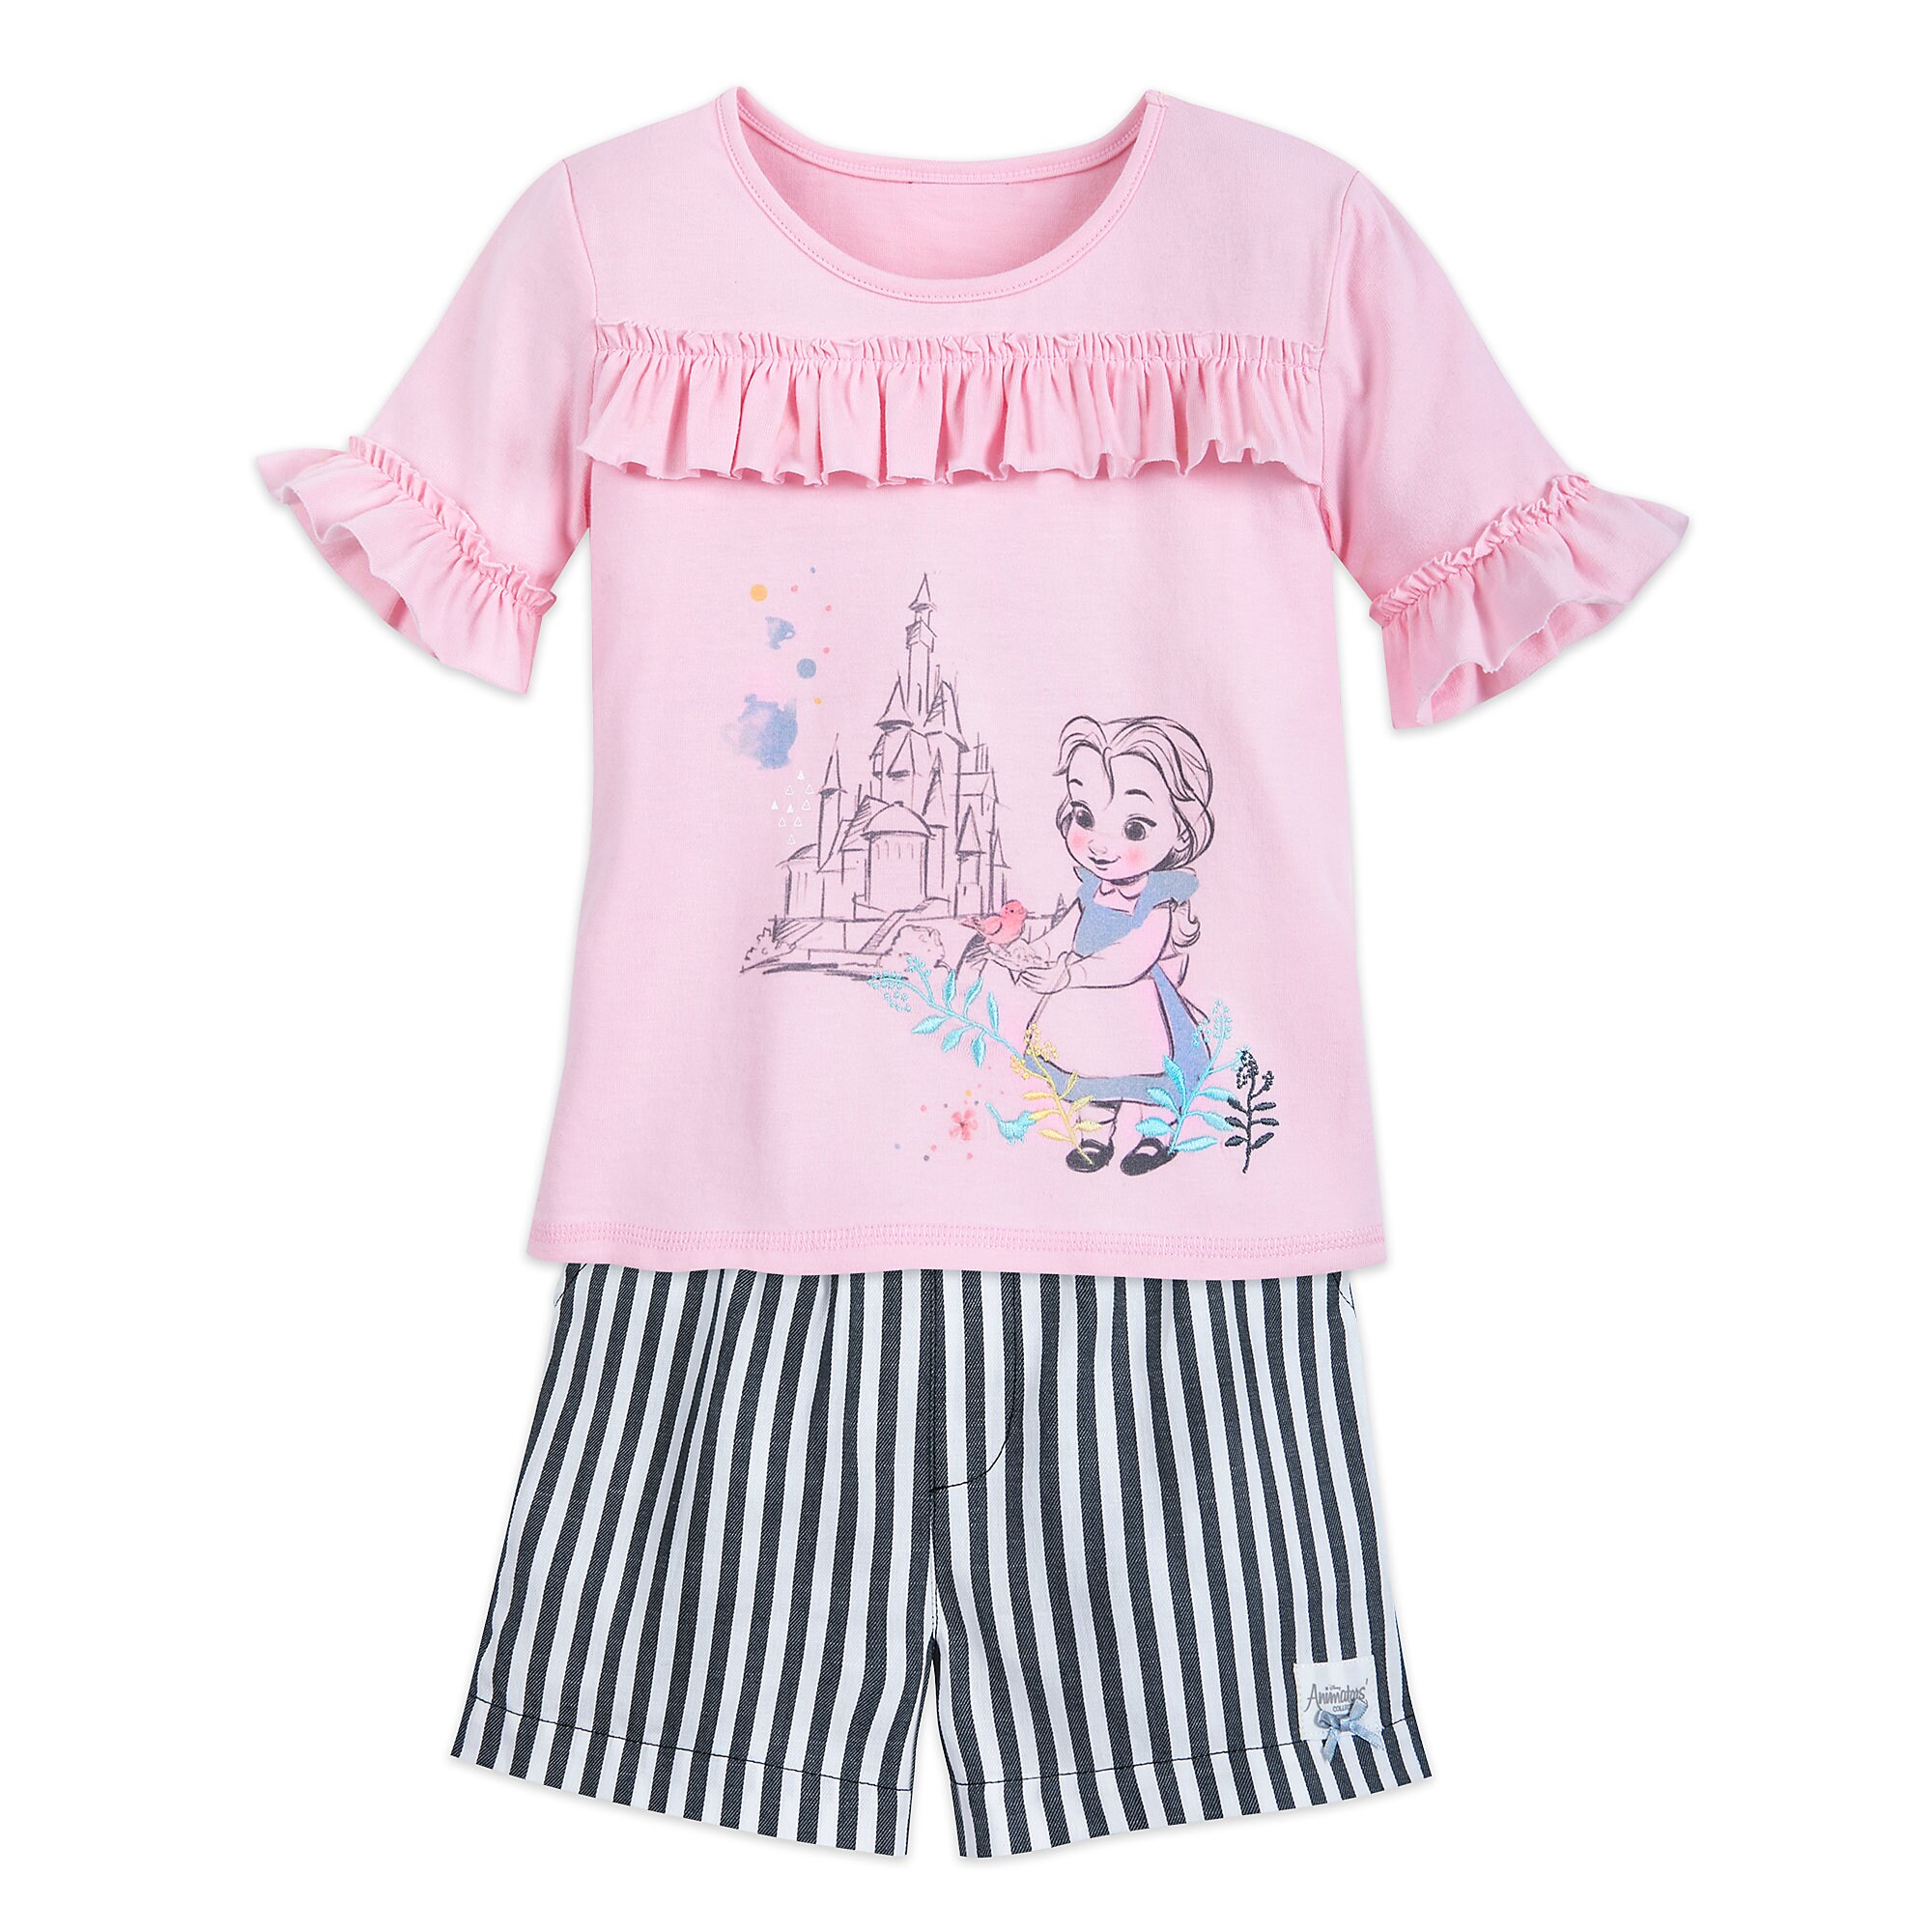 Disney Animators' Collection Belle Top and Shorts Set for Girls